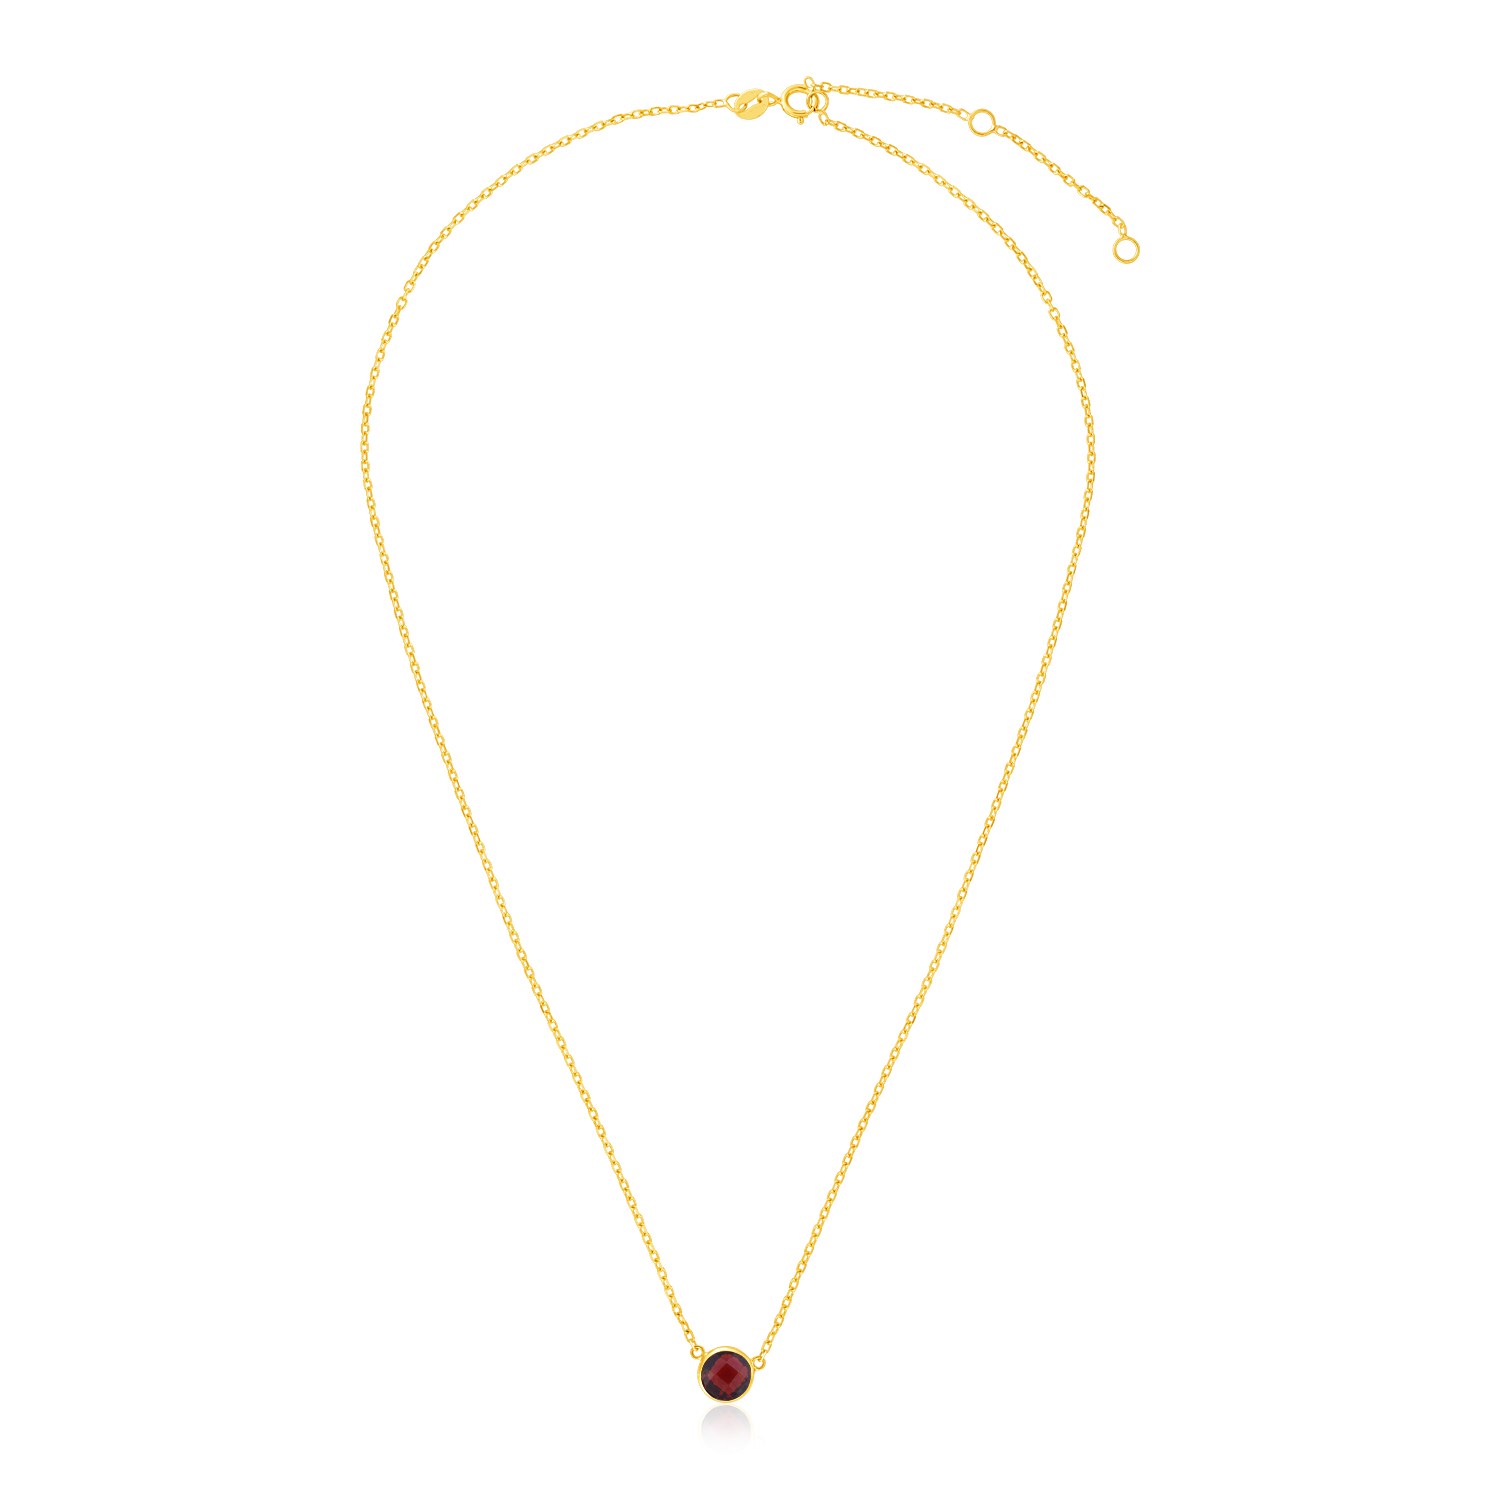 14k Yellow Gold 17 inch Necklace with Round Garnet - Richard Cannon Jewelry